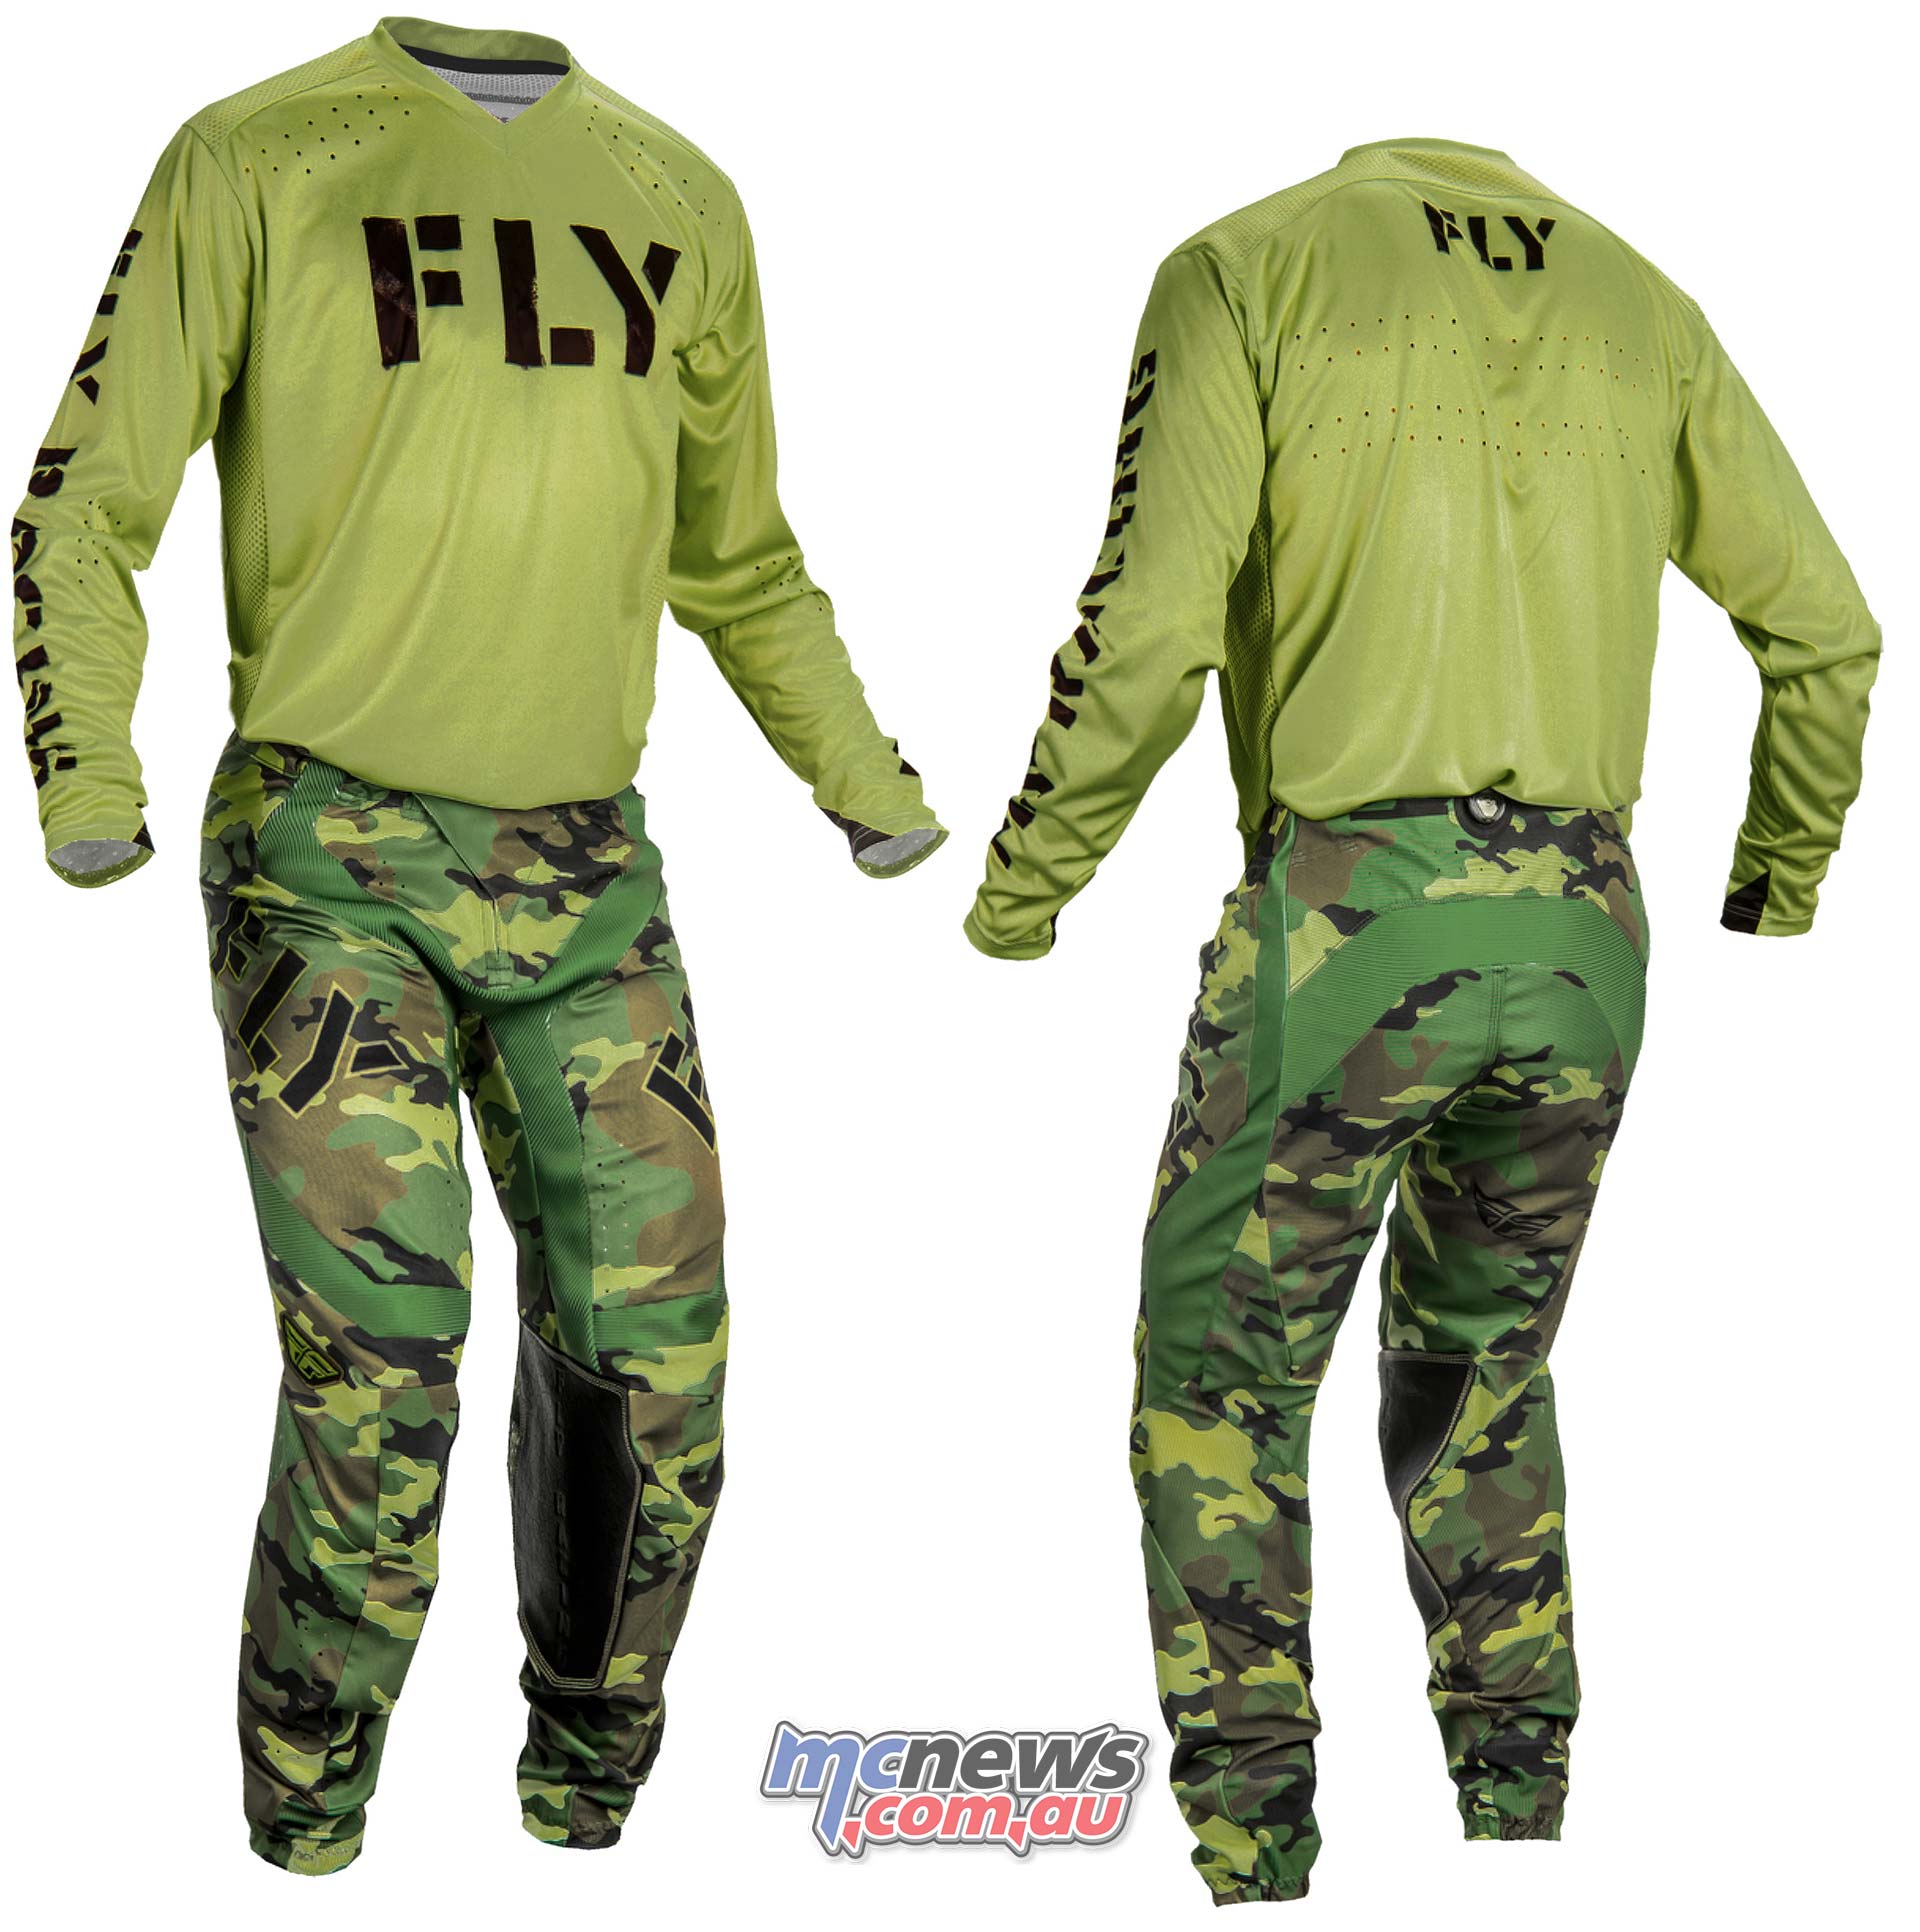 NEW FLY RACING LIMITED EDITION LITE CAMO PANTS MOTORCYCLE ATV MX BMX